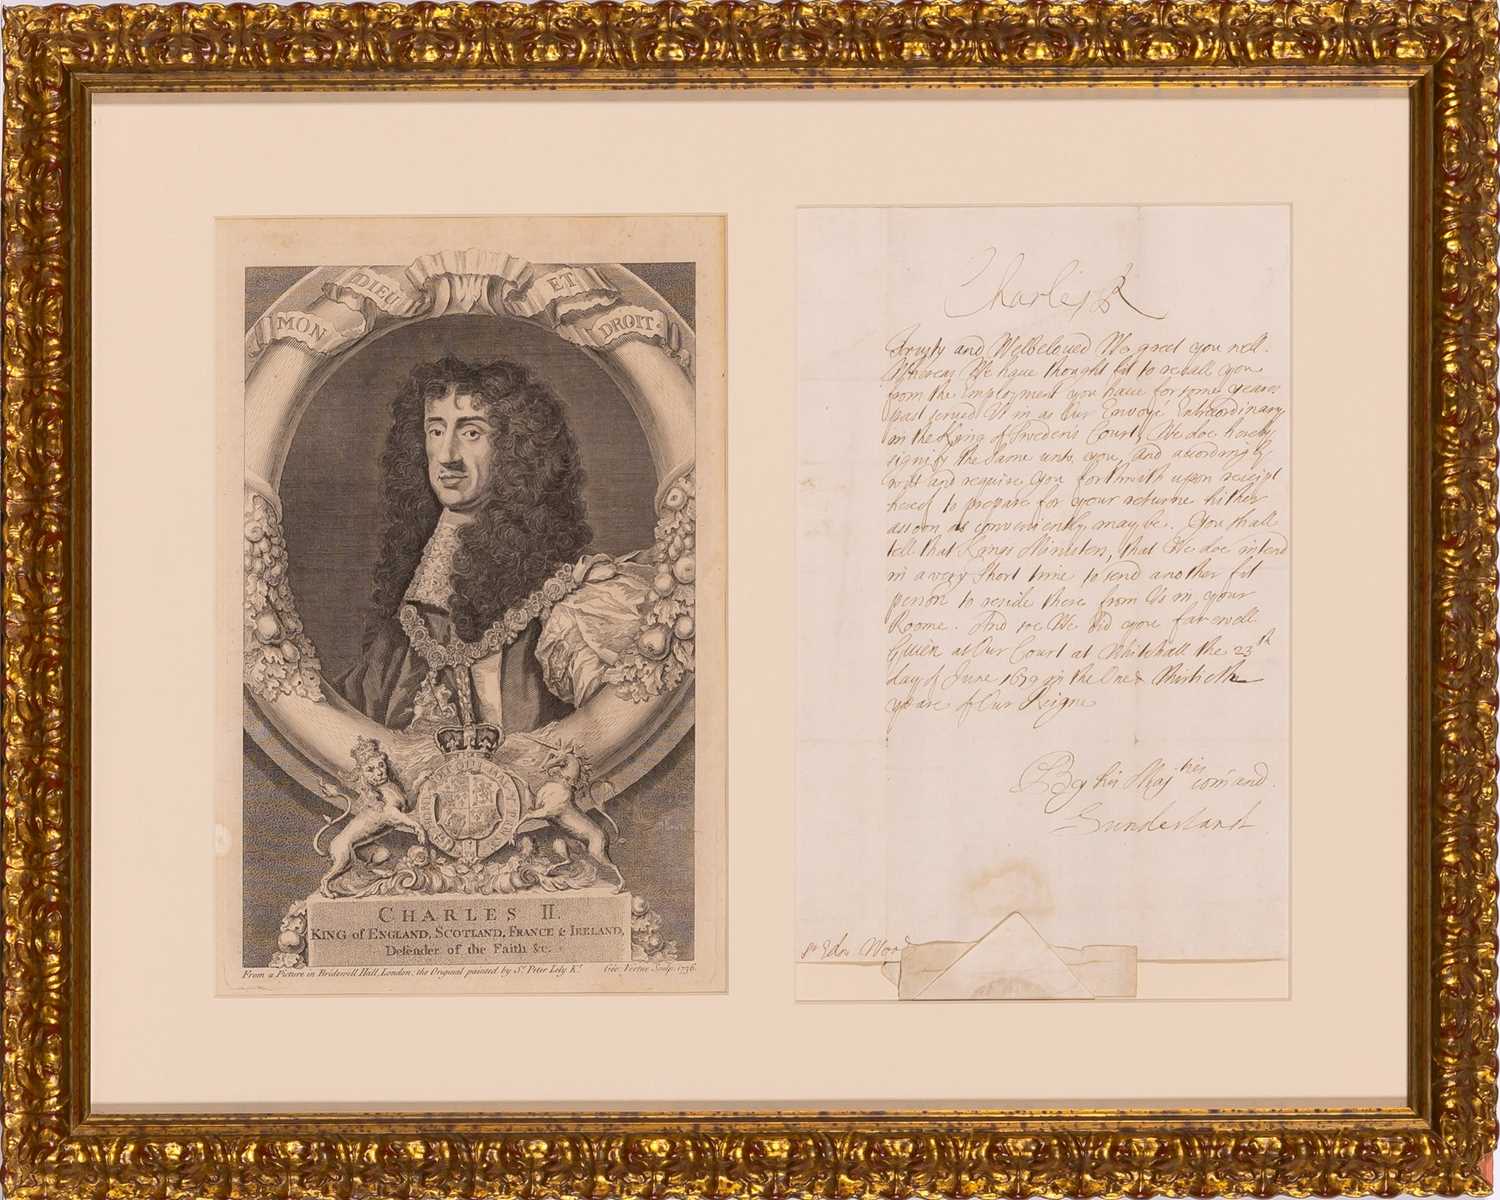 Lot 2 - Document signed by Charles II